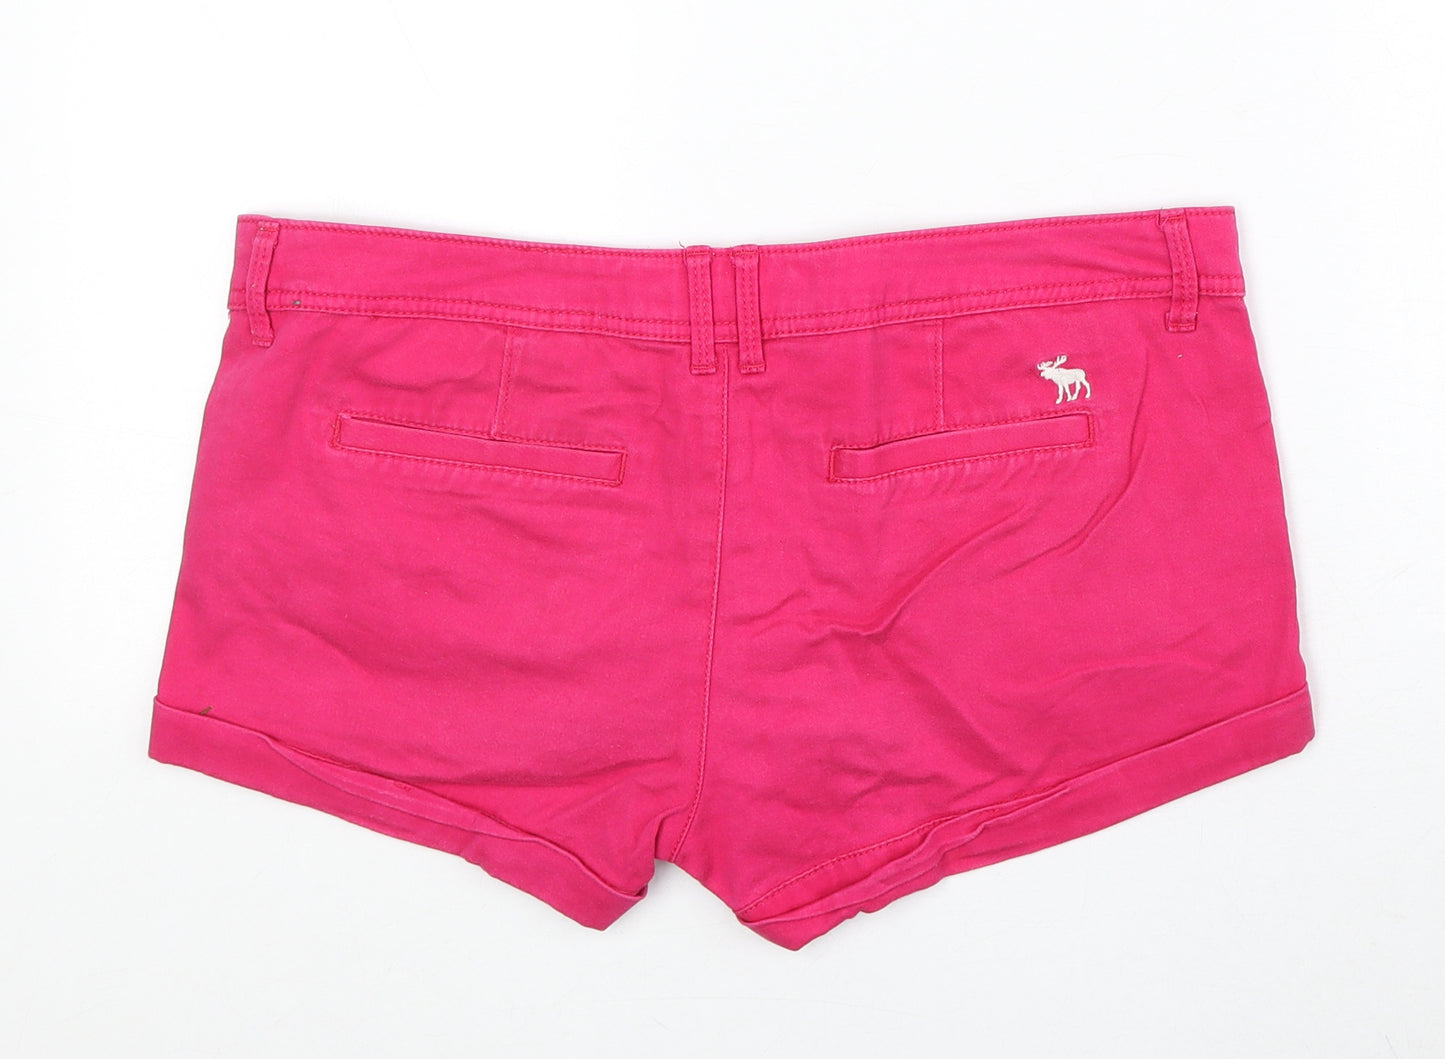 Abercrombie & Fitch Womens Pink Cotton Hot Pants Shorts Size 10 Regular Zip